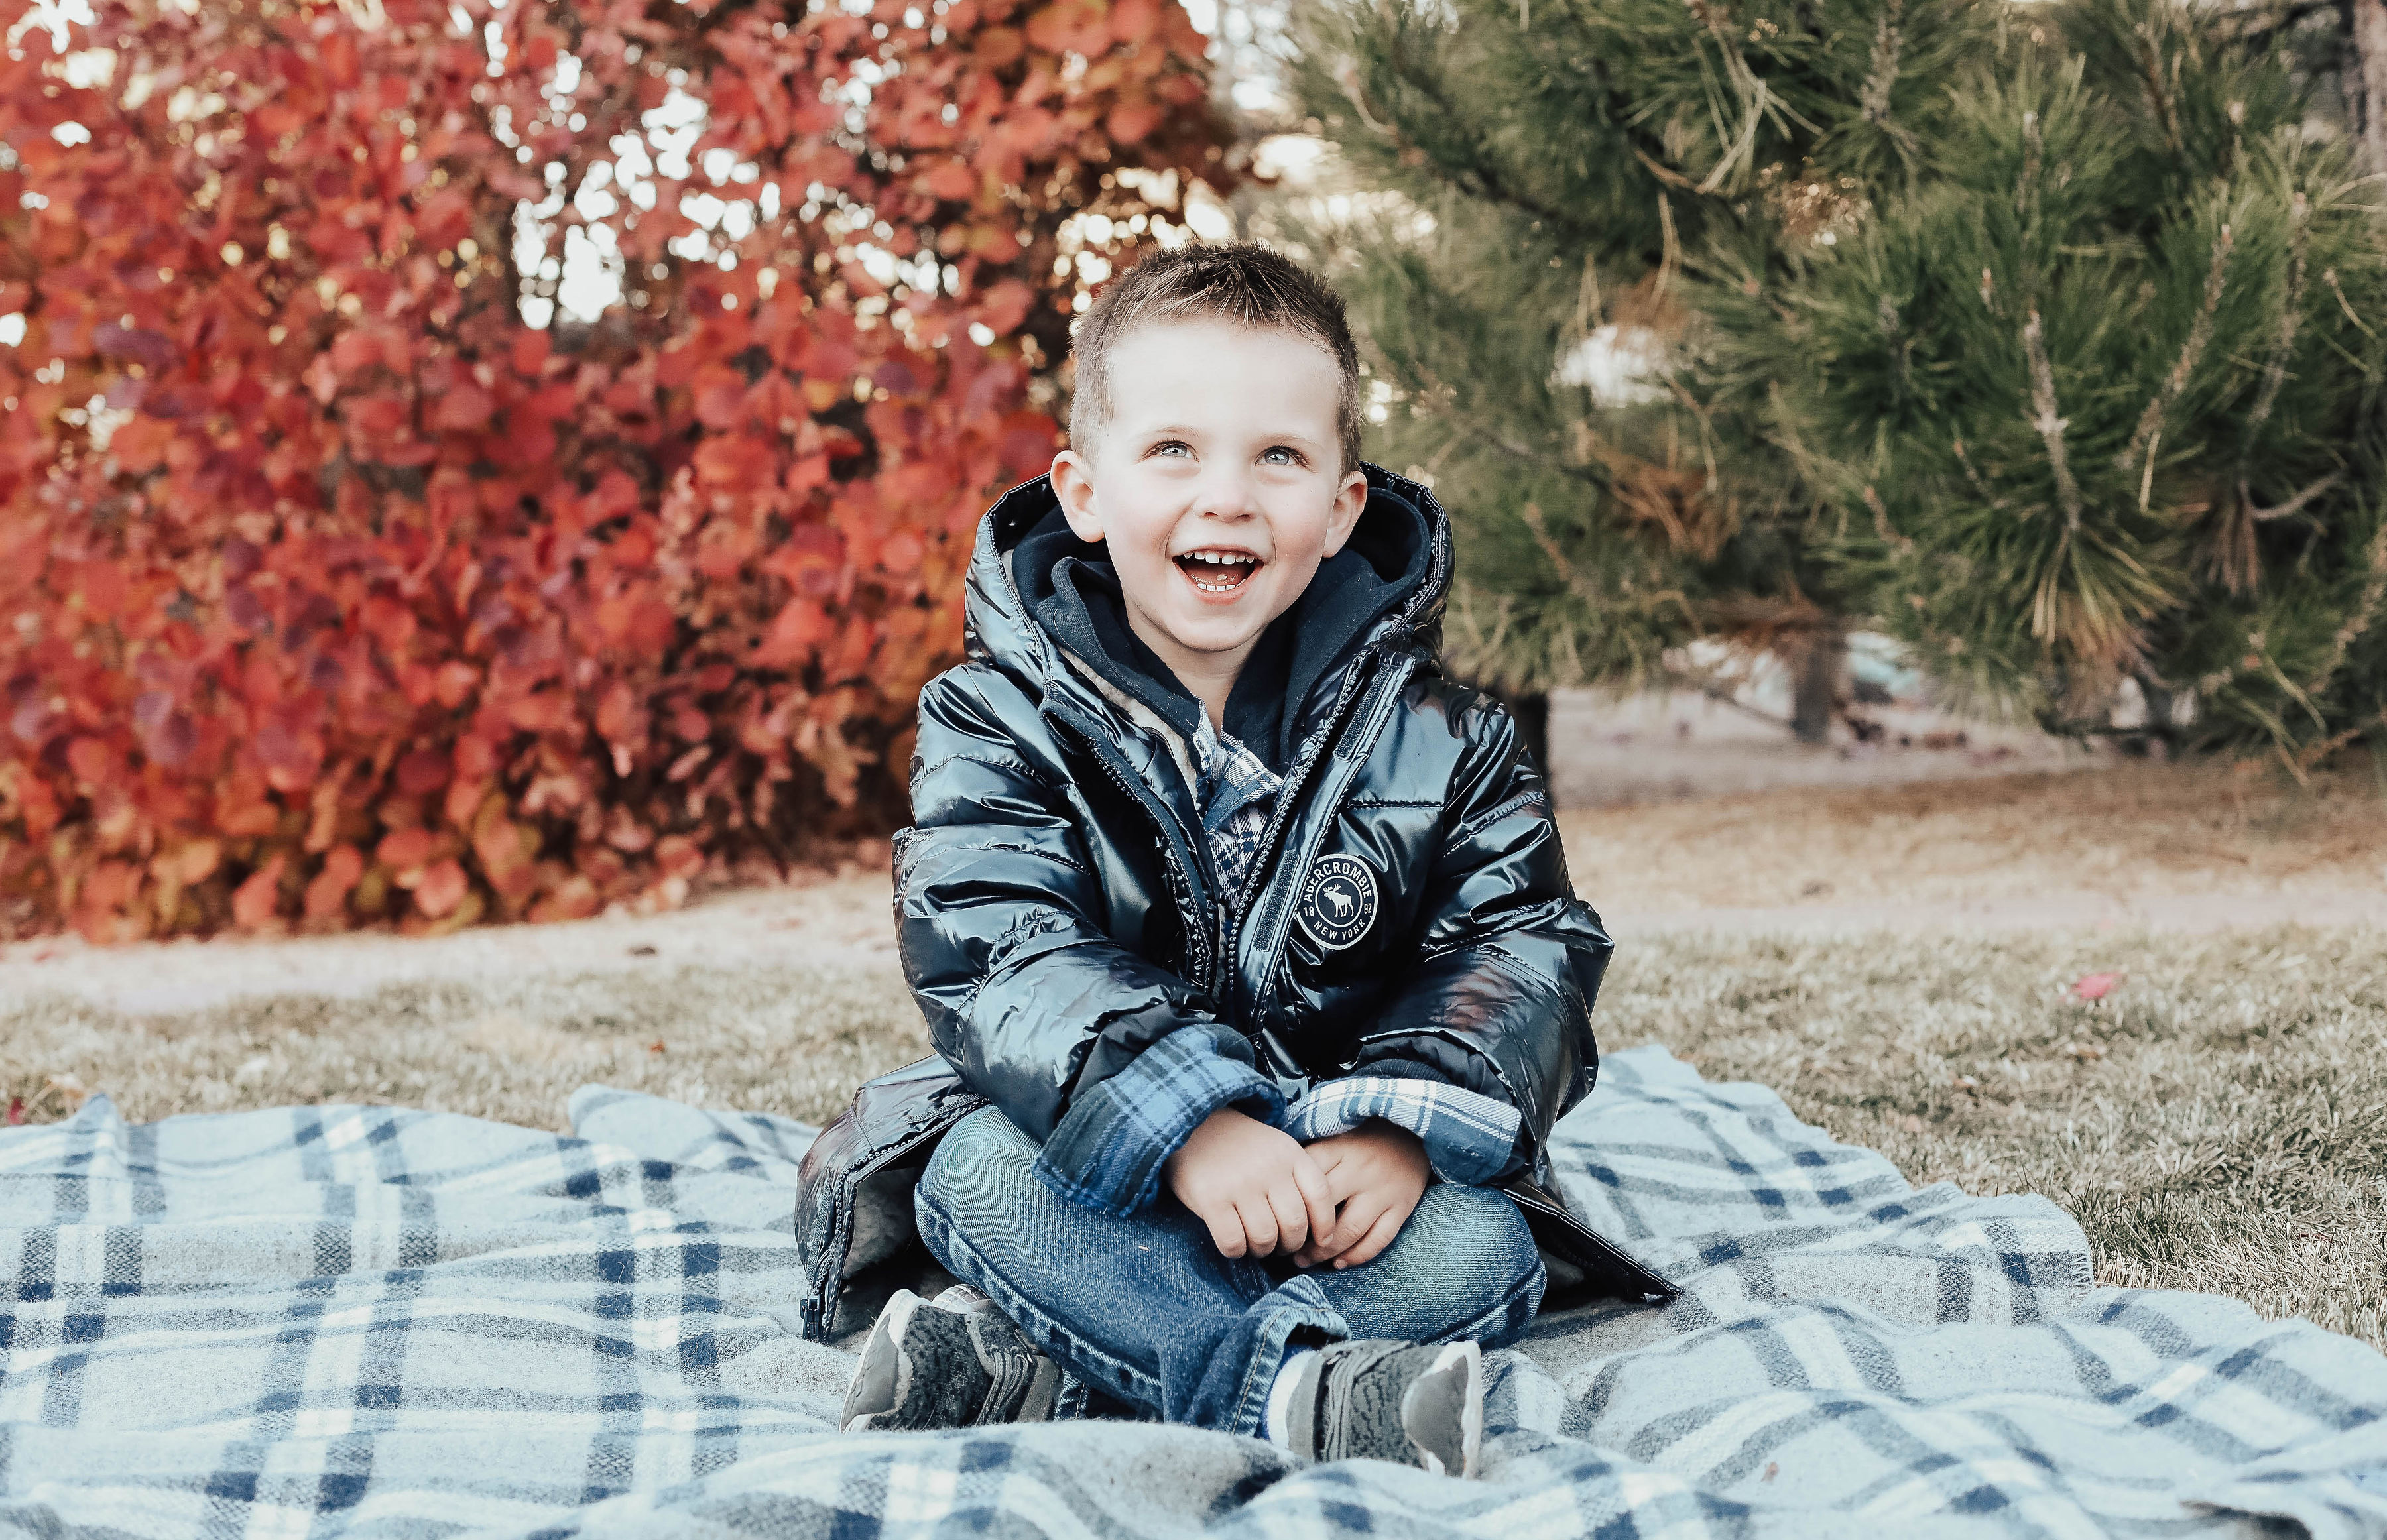 Reno Nevada Blogger Emily Farren Wieczorek of Two Peas in a Prada talks about her favorite store for winter weather gear for her son - Abercrombie & Fitch Kids.